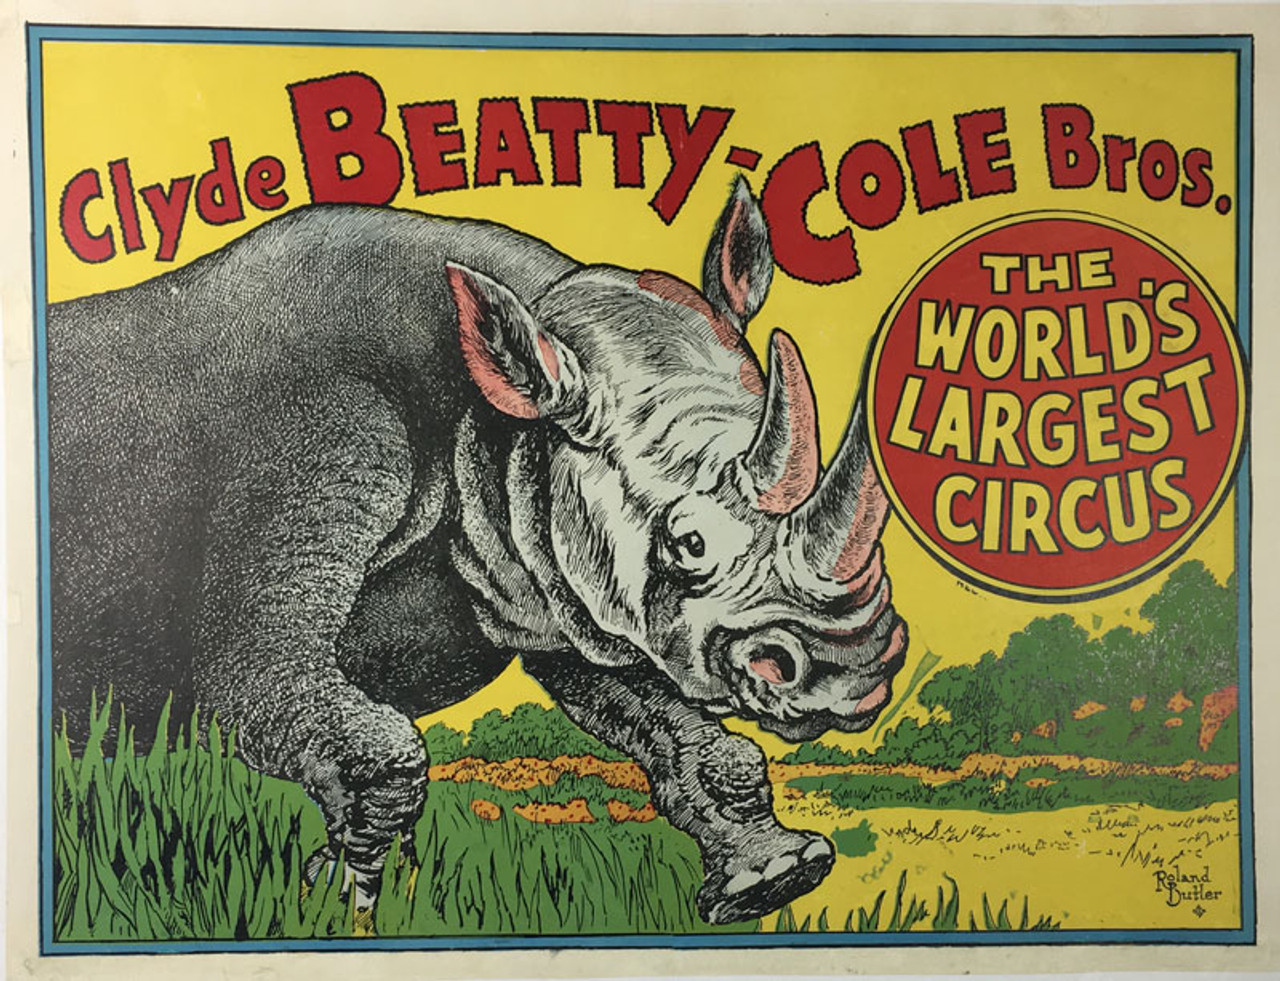 Clyde Beatty Cole Bros. The Worlds Largest Circus